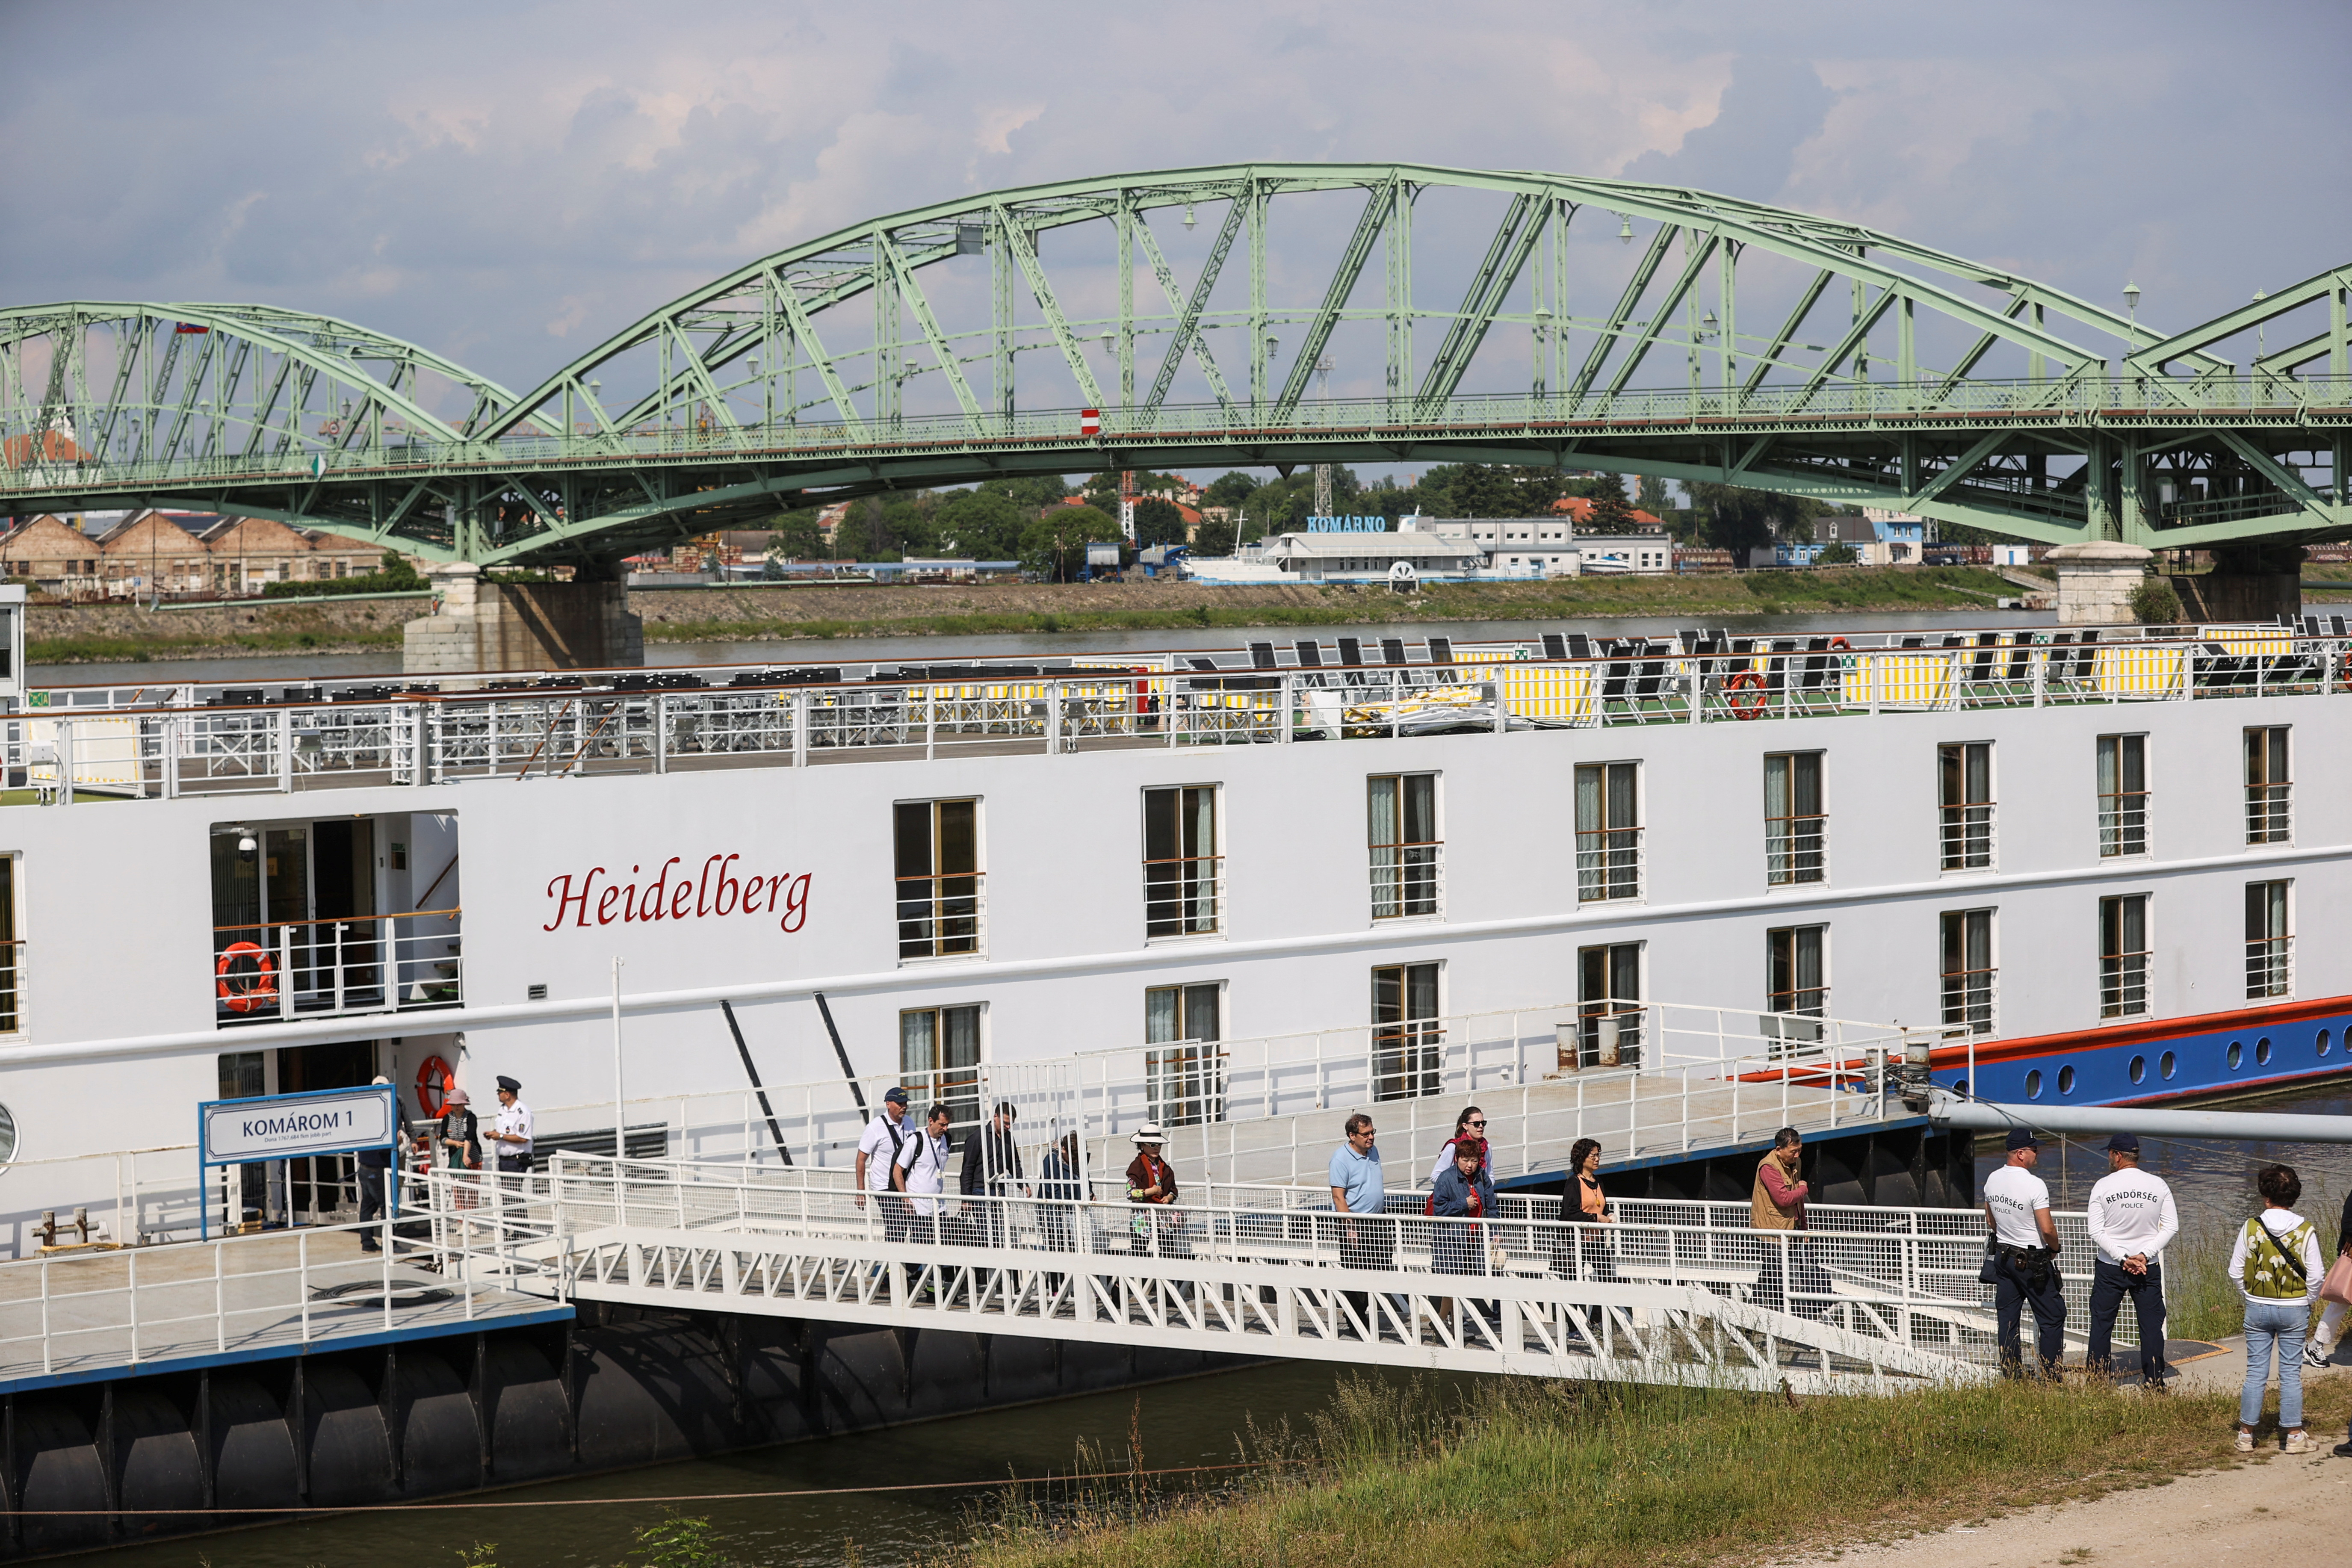 The river cruise ship 'Heidelberg' is seen following an accident on Danube river, near Komarom